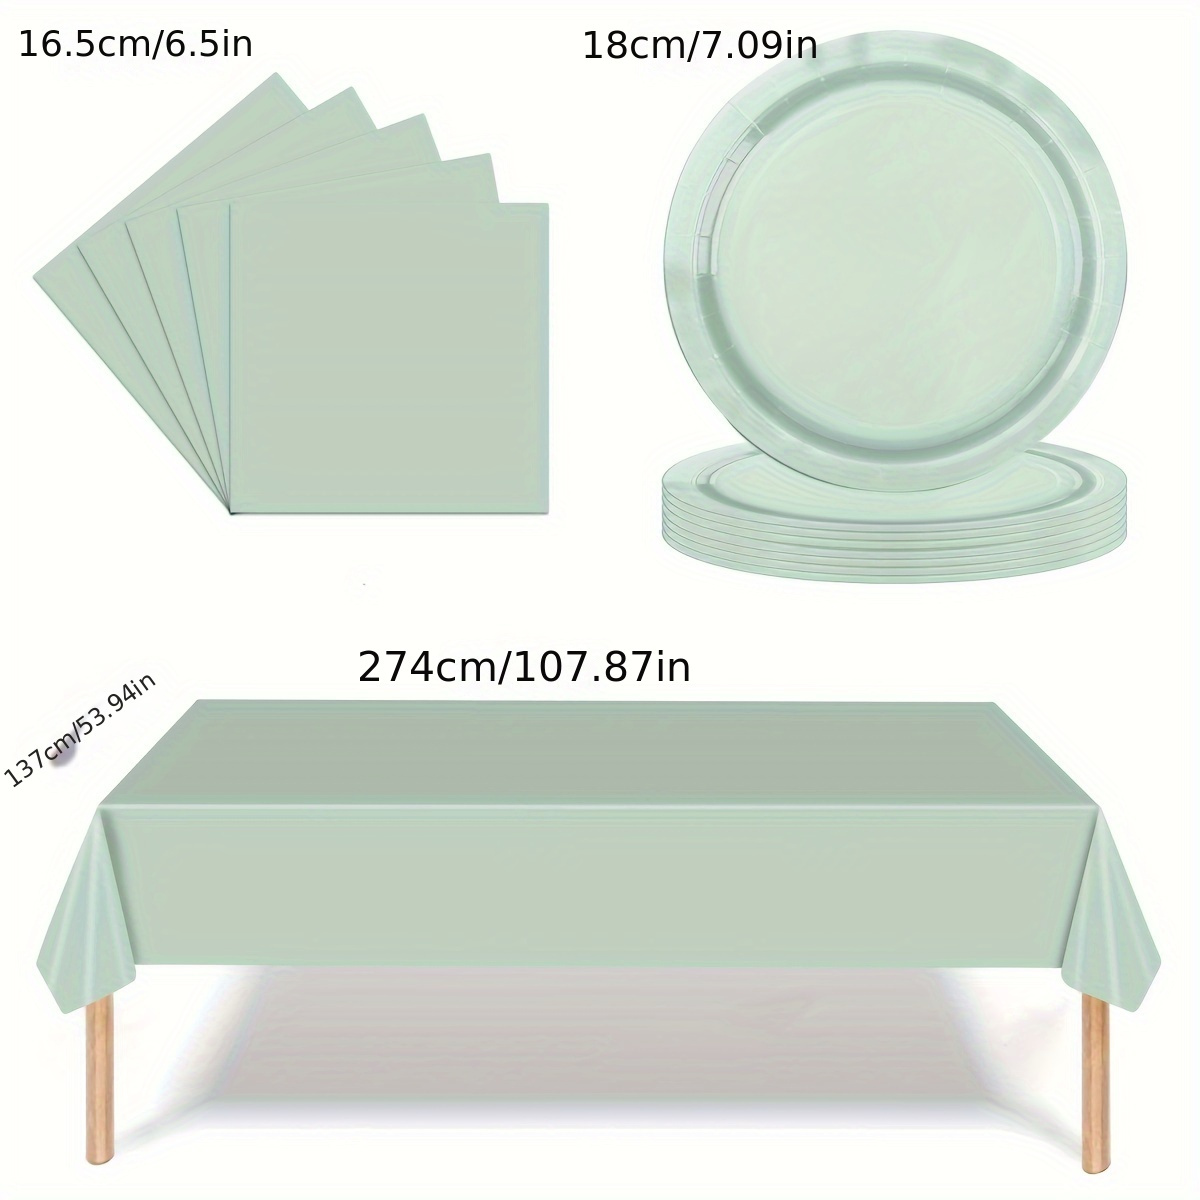 

41-piece Sage Green Party Supplies Set - Includes Disposable Plates, Napkins & Tablecloth For 20 Guests - Perfect For Weddings, Bridal Showers & Birthday Celebrations